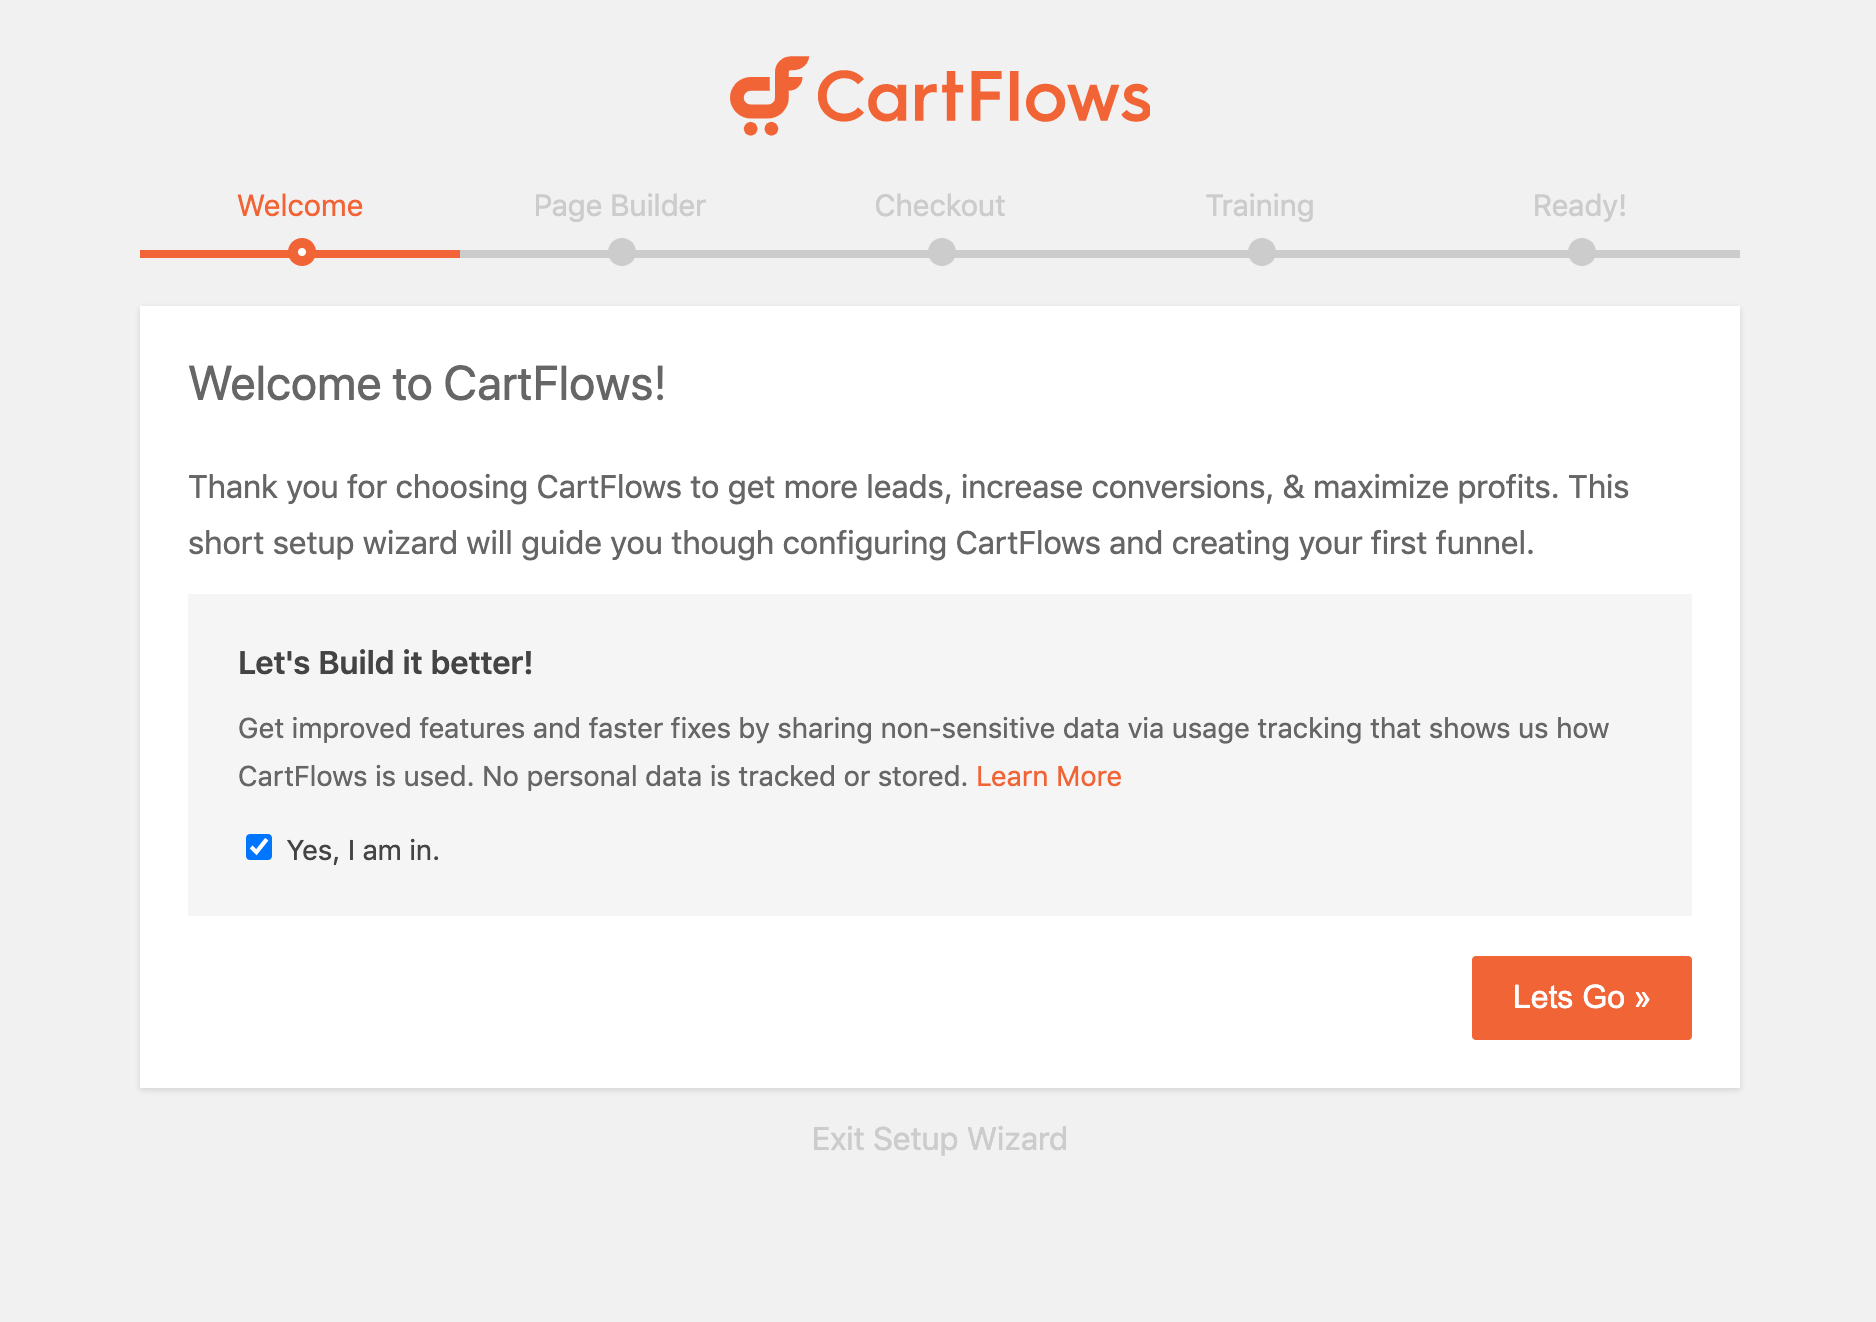 Use the Cartflows setup wizard to set up a sales funnel in WordPress